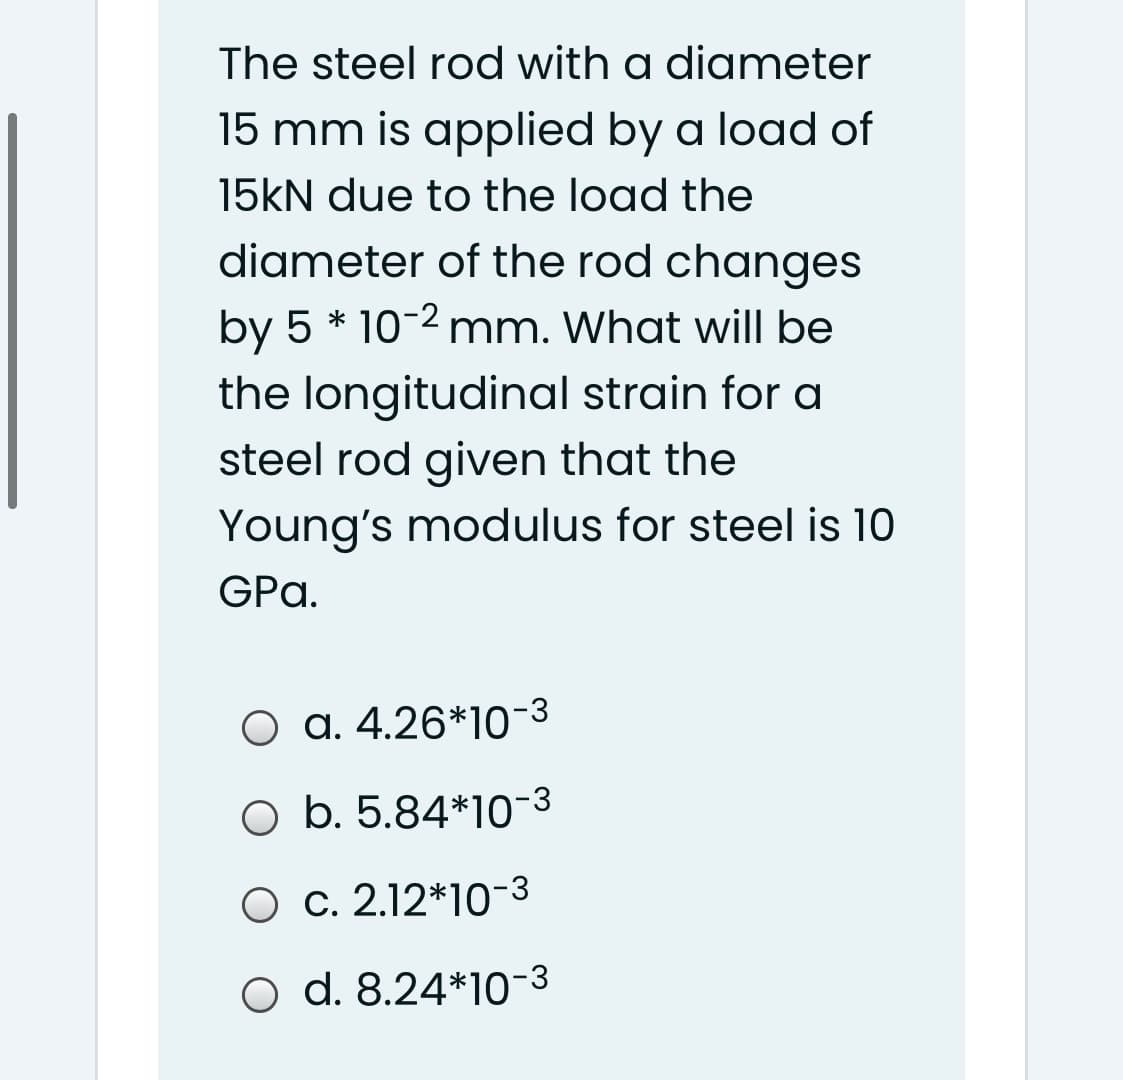 The steel rod with a diameter
15 mm is applied by a load of
15KN due to the load the
diameter of the rod changes
by 5 * 10-2 mm. What will be
the longitudinal strain for a
steel rod given that the
Young's modulus for steel is 10
GPa.
O a. 4.26*10-3
O b. 5.84*10-3
O c. 2.12*10-3
o d. 8.24*10-3
